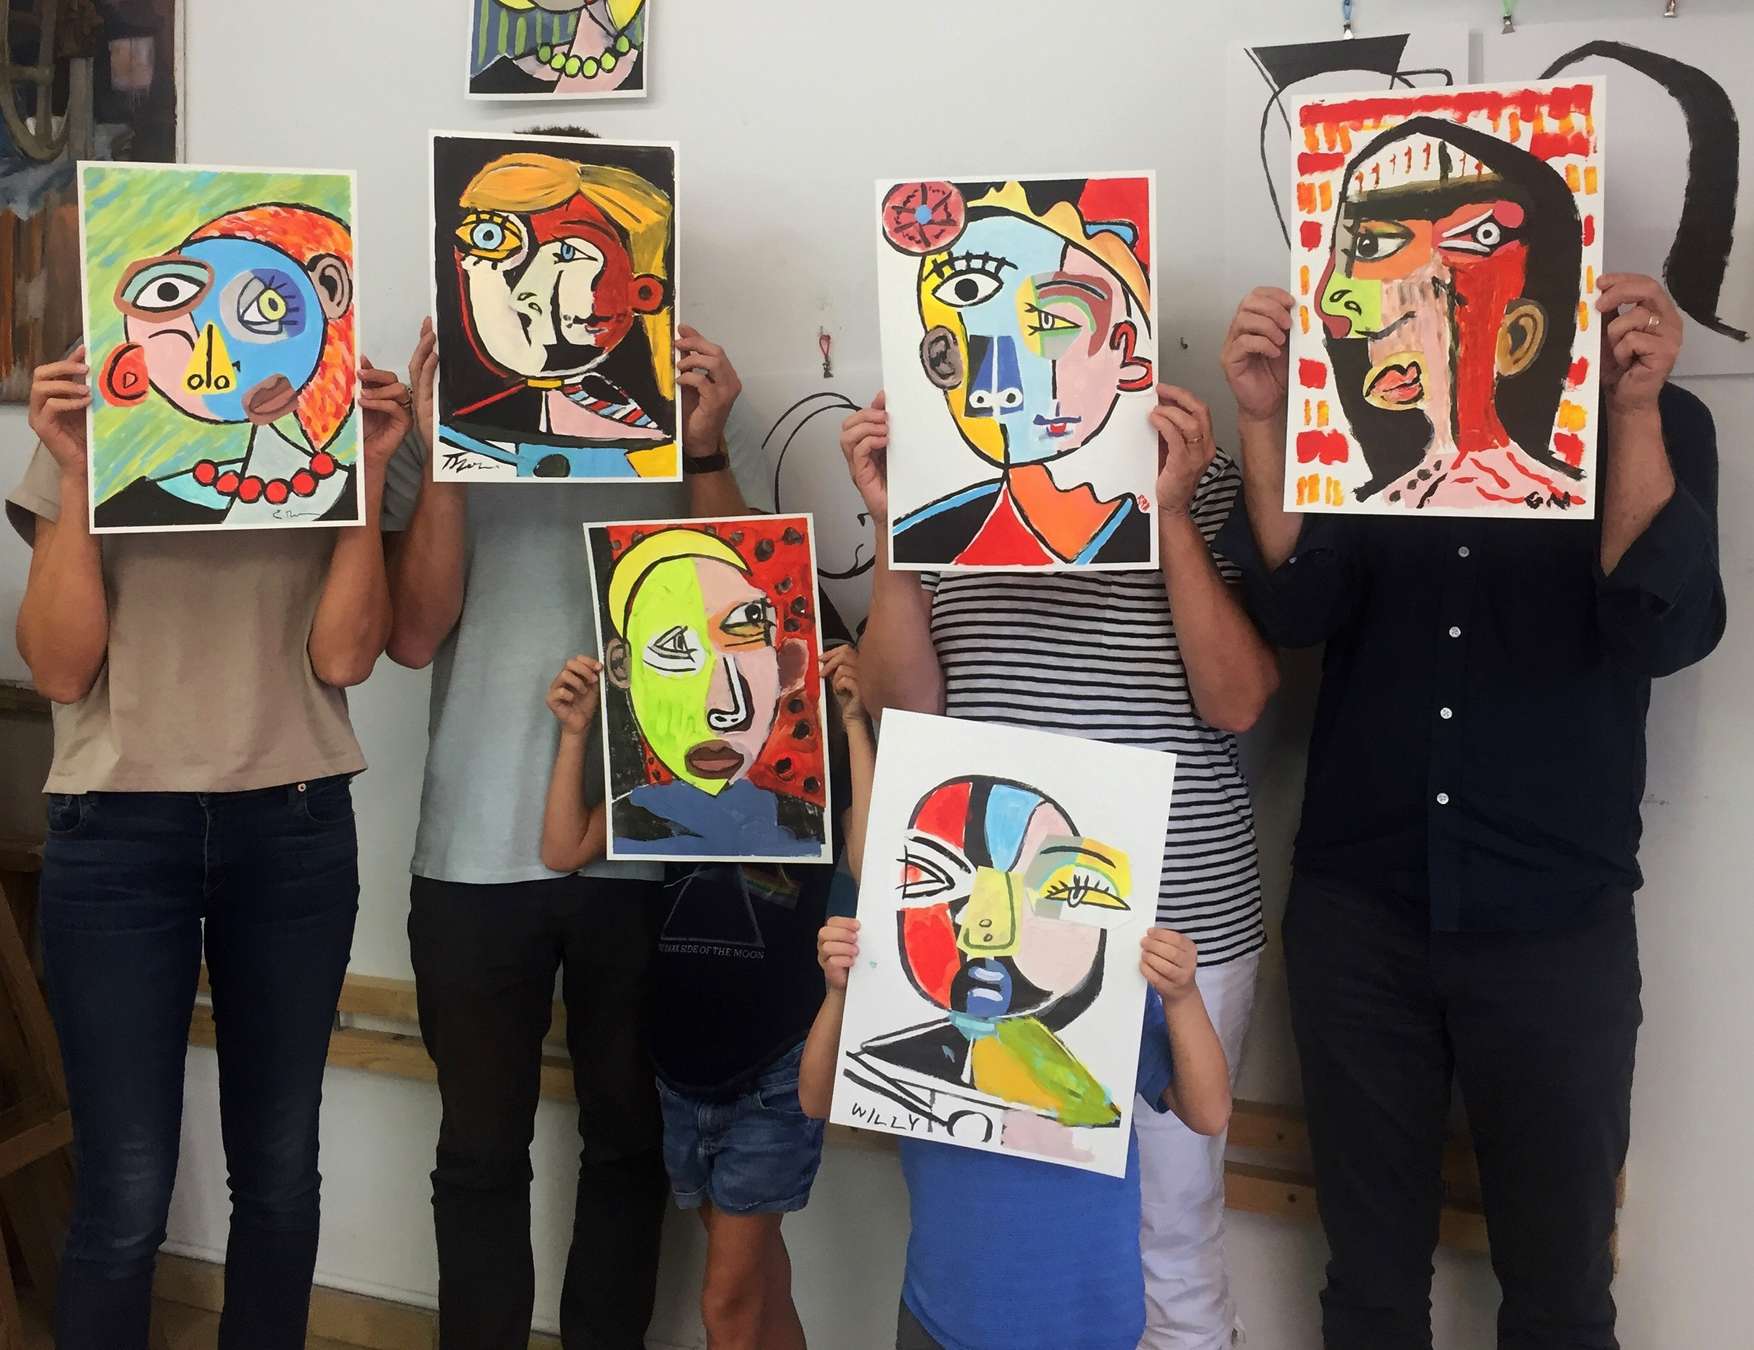 Paintings like Picasso workshop